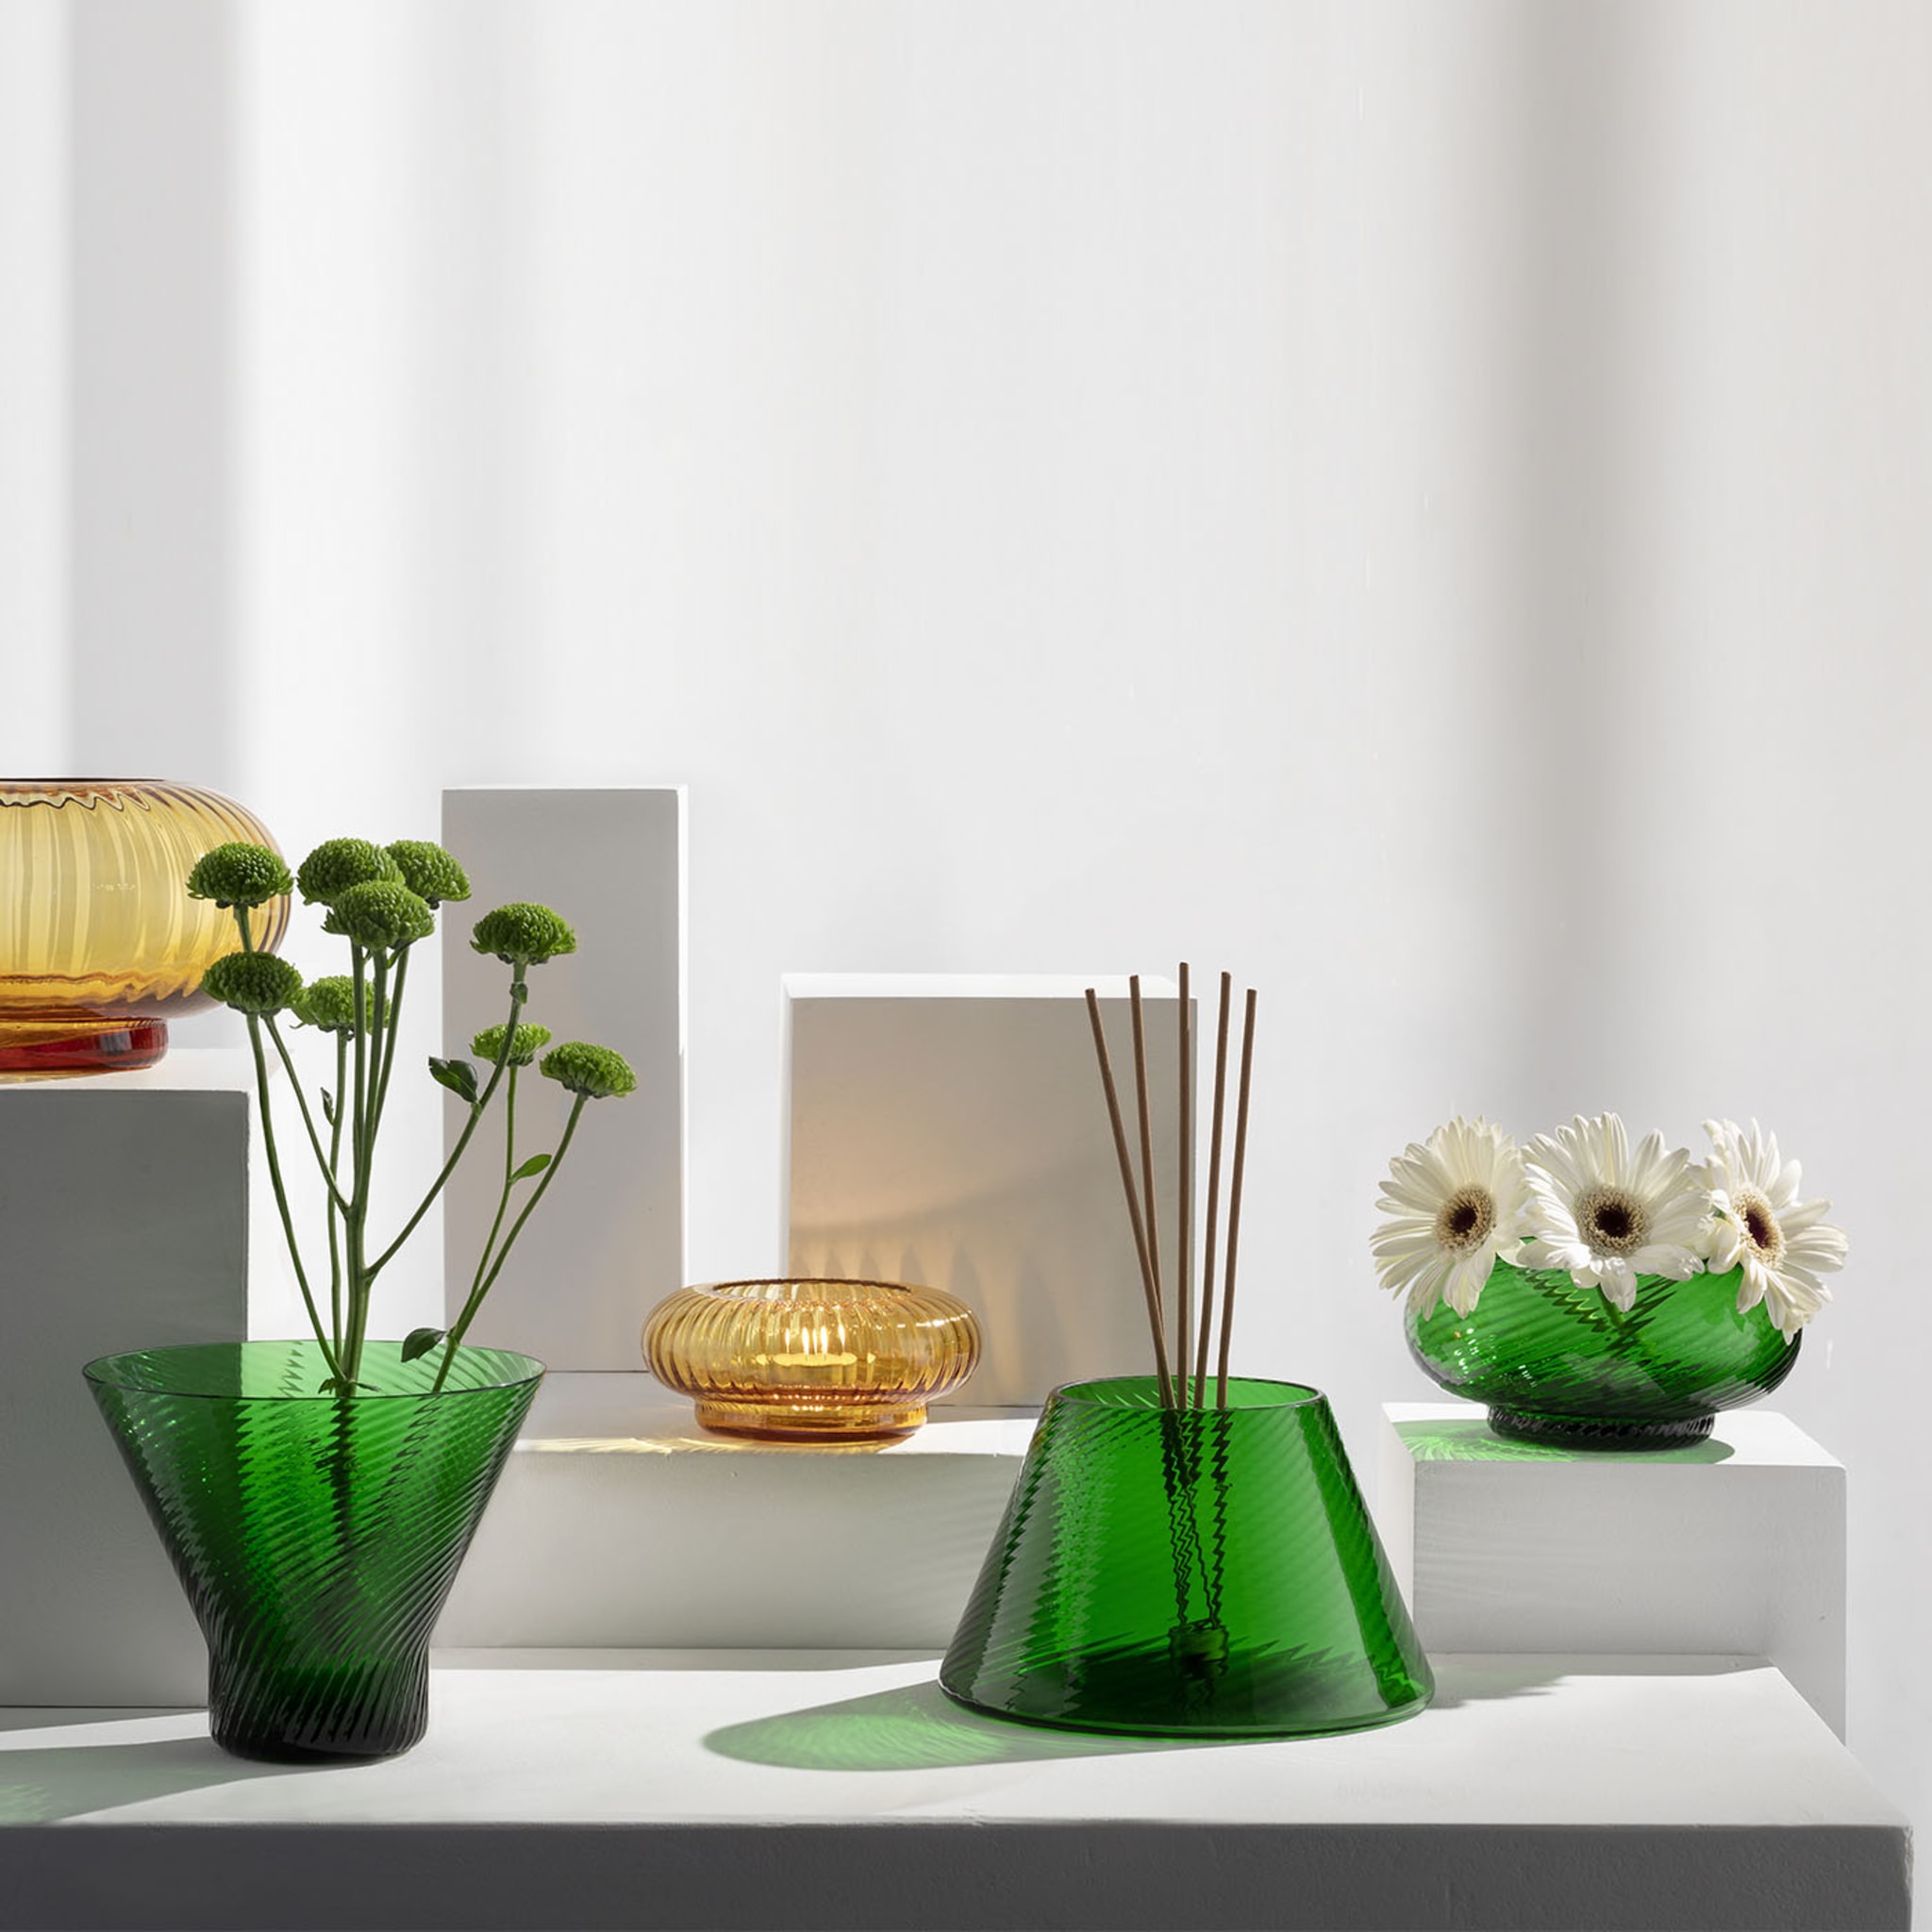 Issey Set of 5 Green and Amber Vases By Matteo Zorzenoni - Alternative view 1